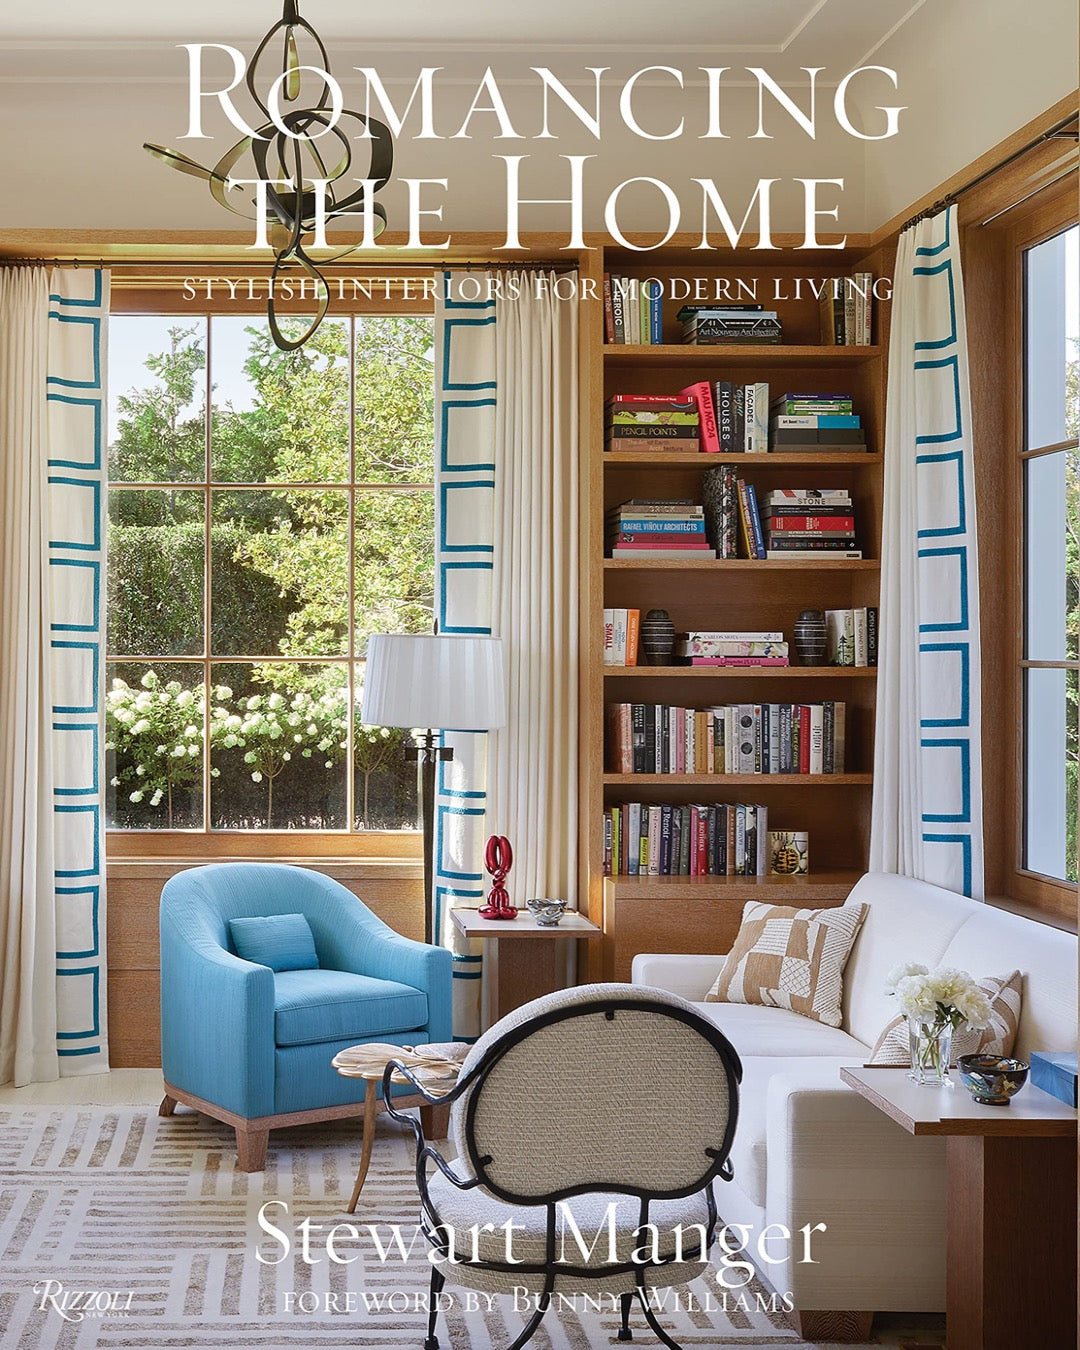 Romancing the Home Books 